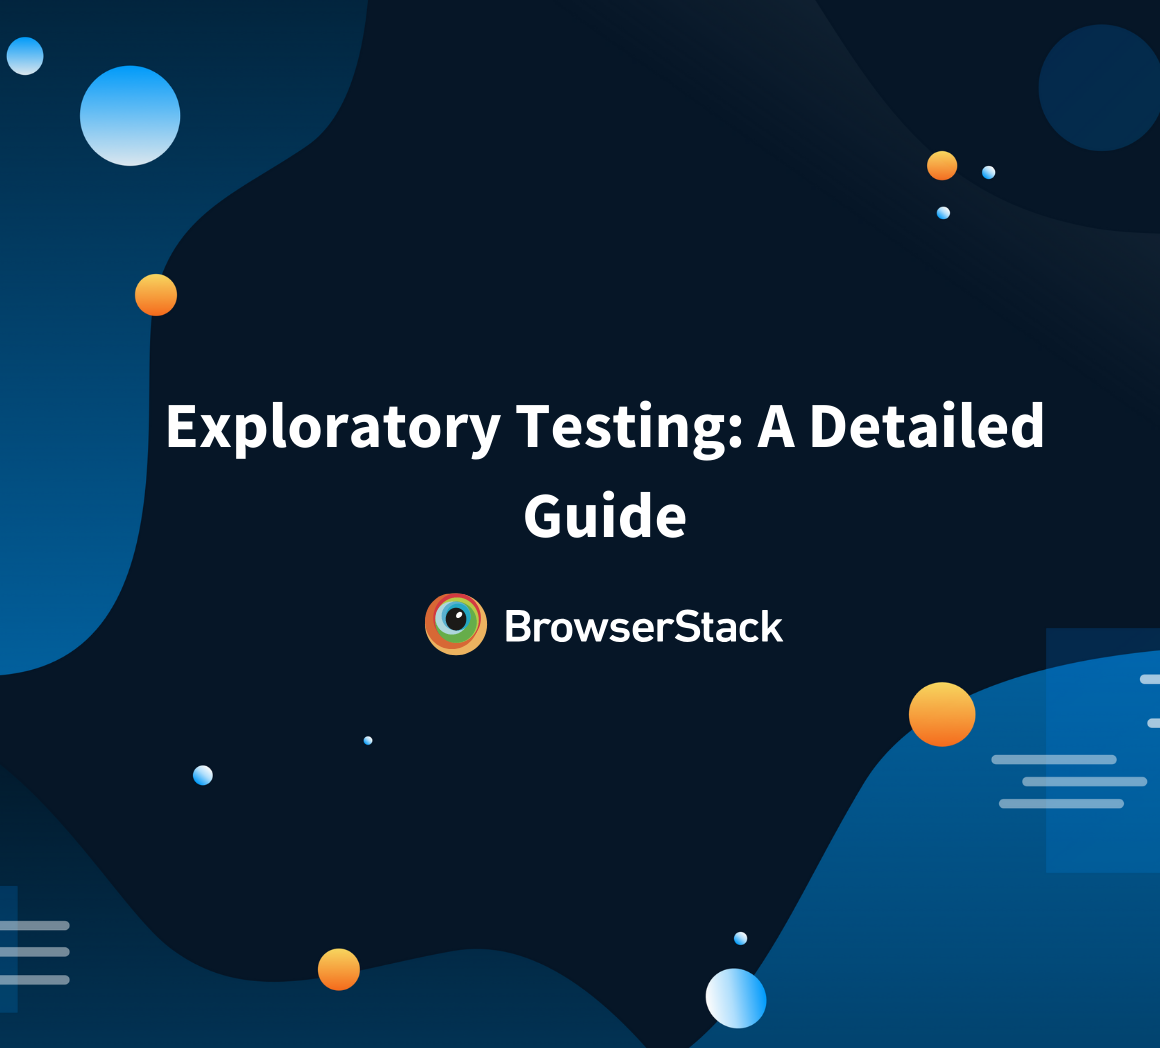 Exploratory Testing: A Detailed Guide